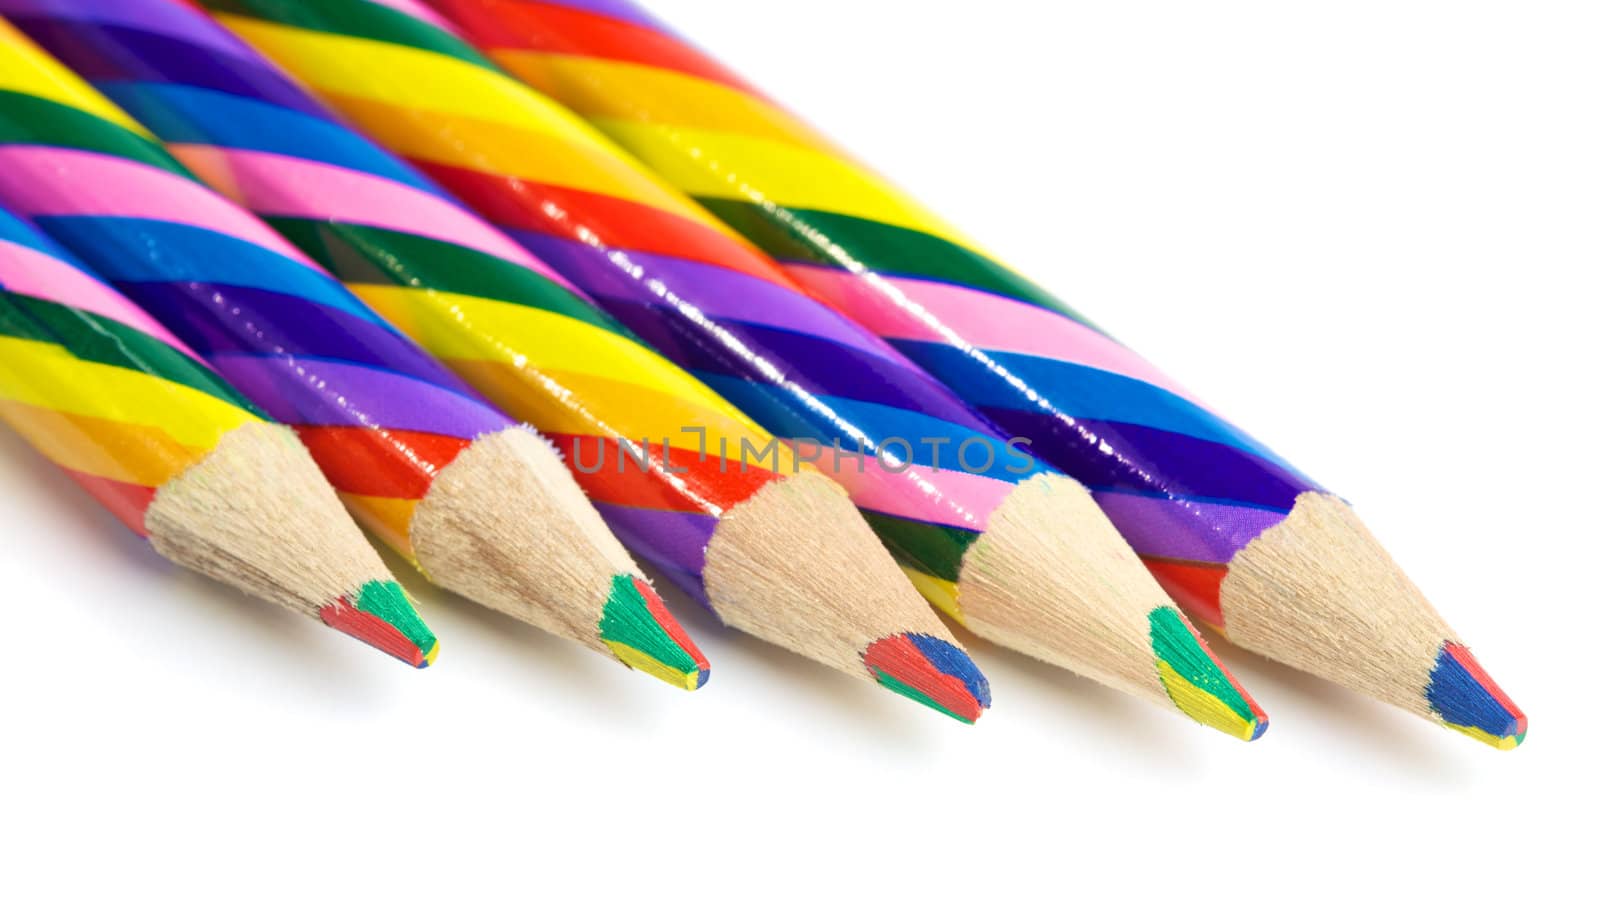 striped colorful pencils isolated on white background